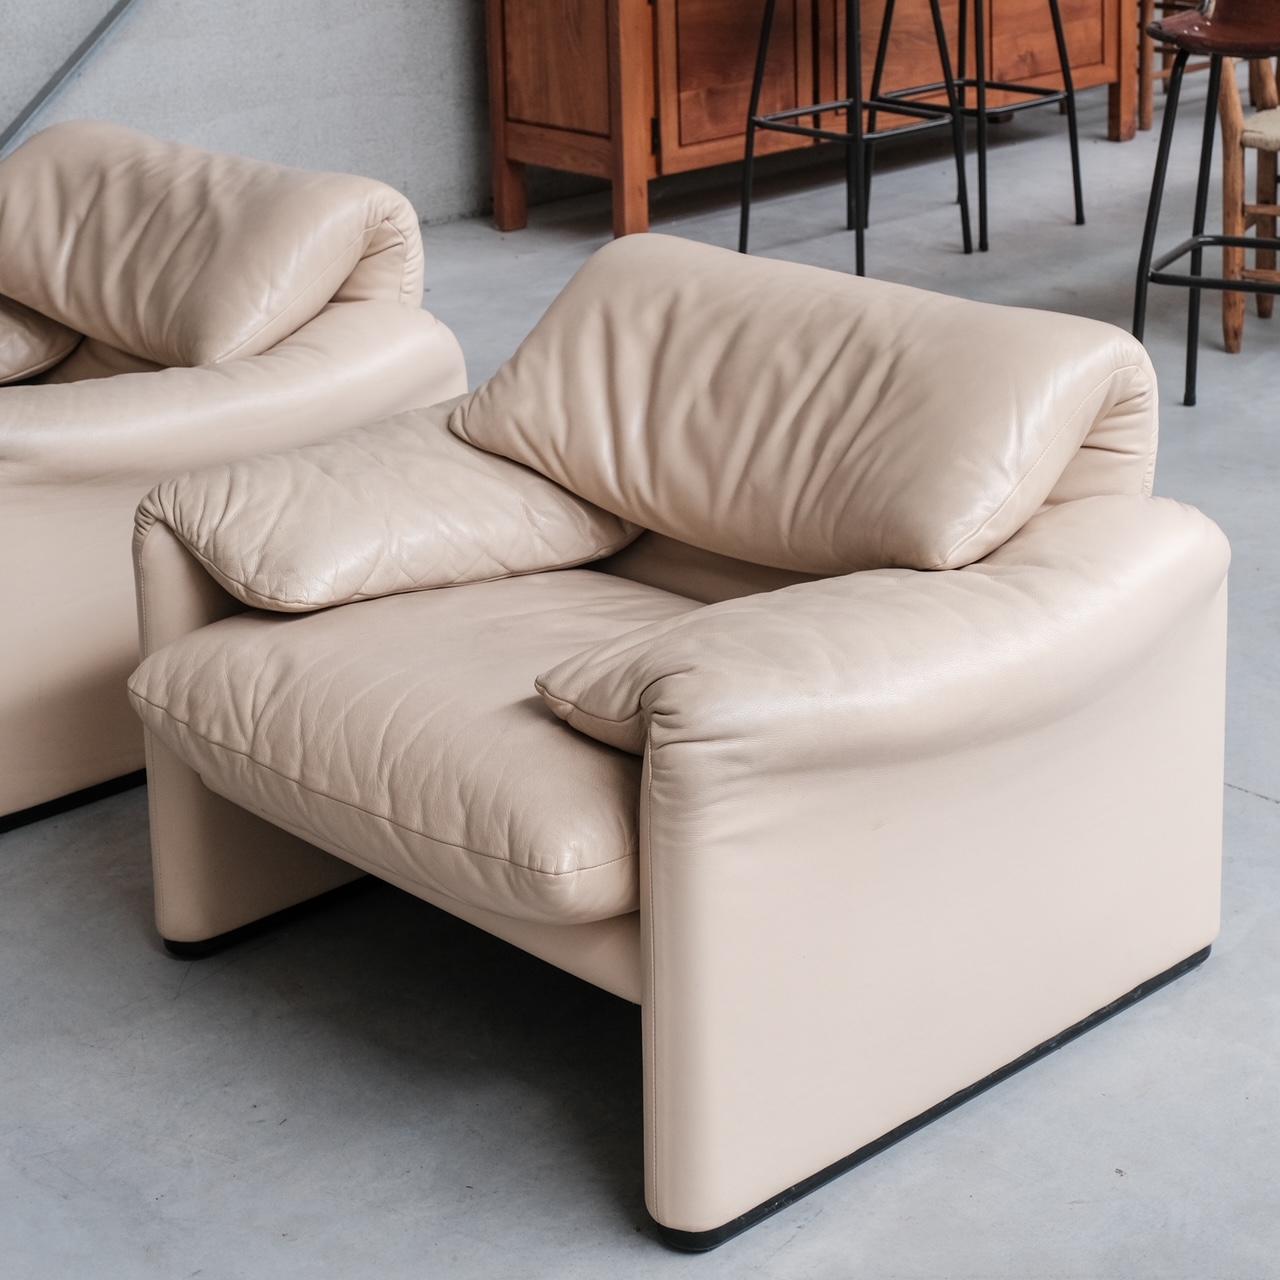 Vico Magisretti 'Maralunga' Suite of Sofas and Armchairs for Cassina For Sale 11